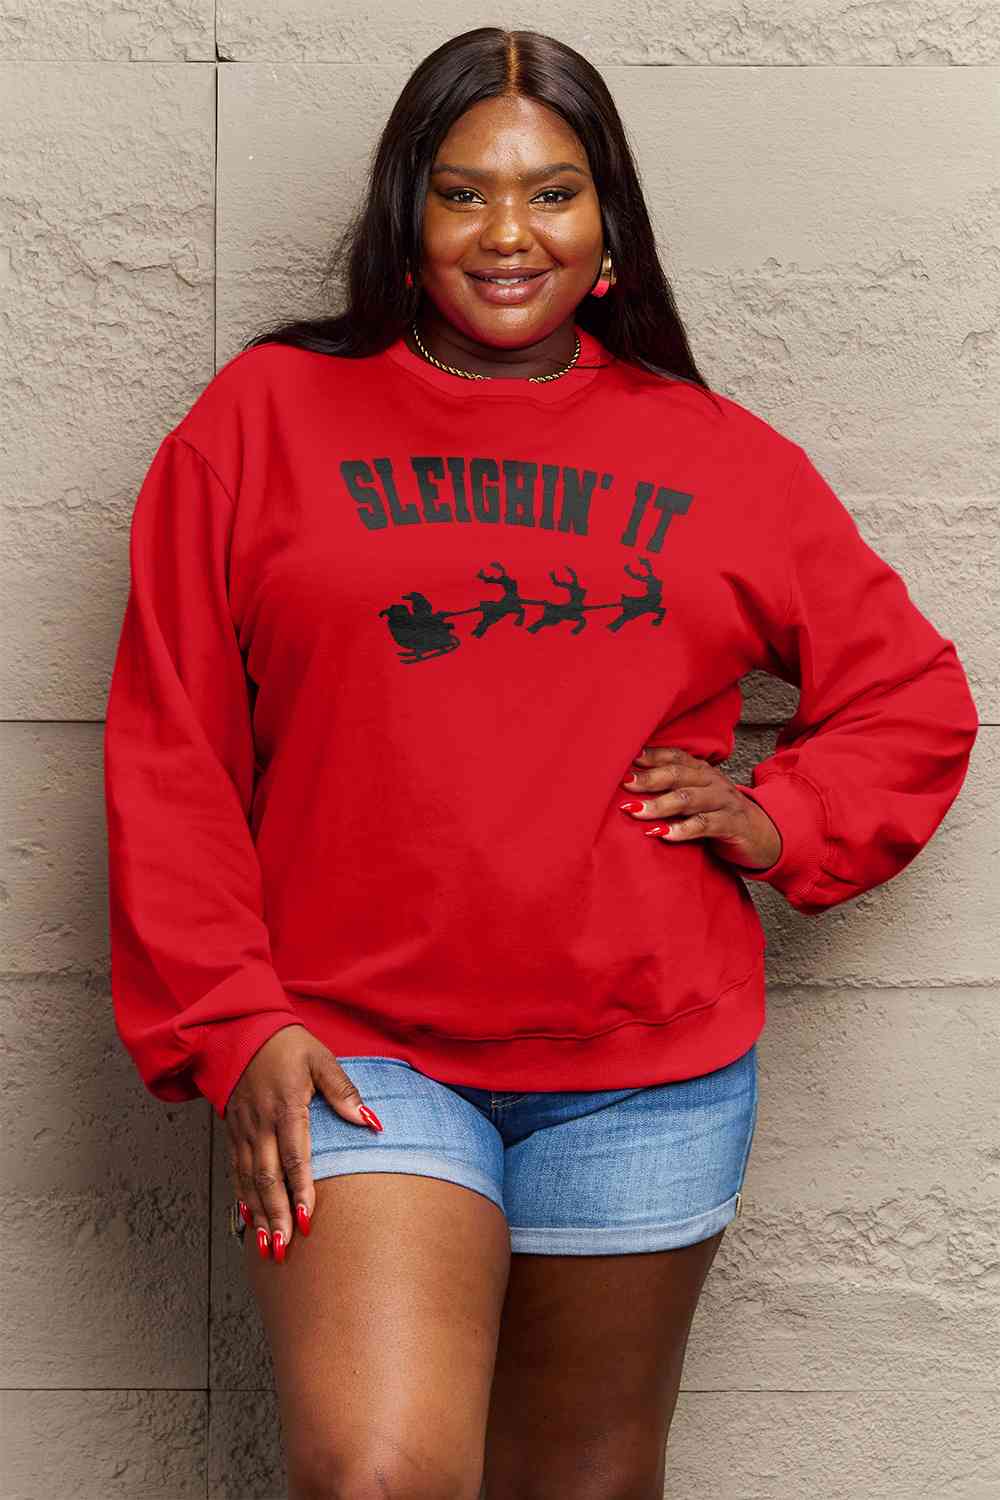 Brown Simply Love Full Size SLEIGHIN' IT Graphic Sweatshirt Sentient Beauty Fashions Apparel & Accessories